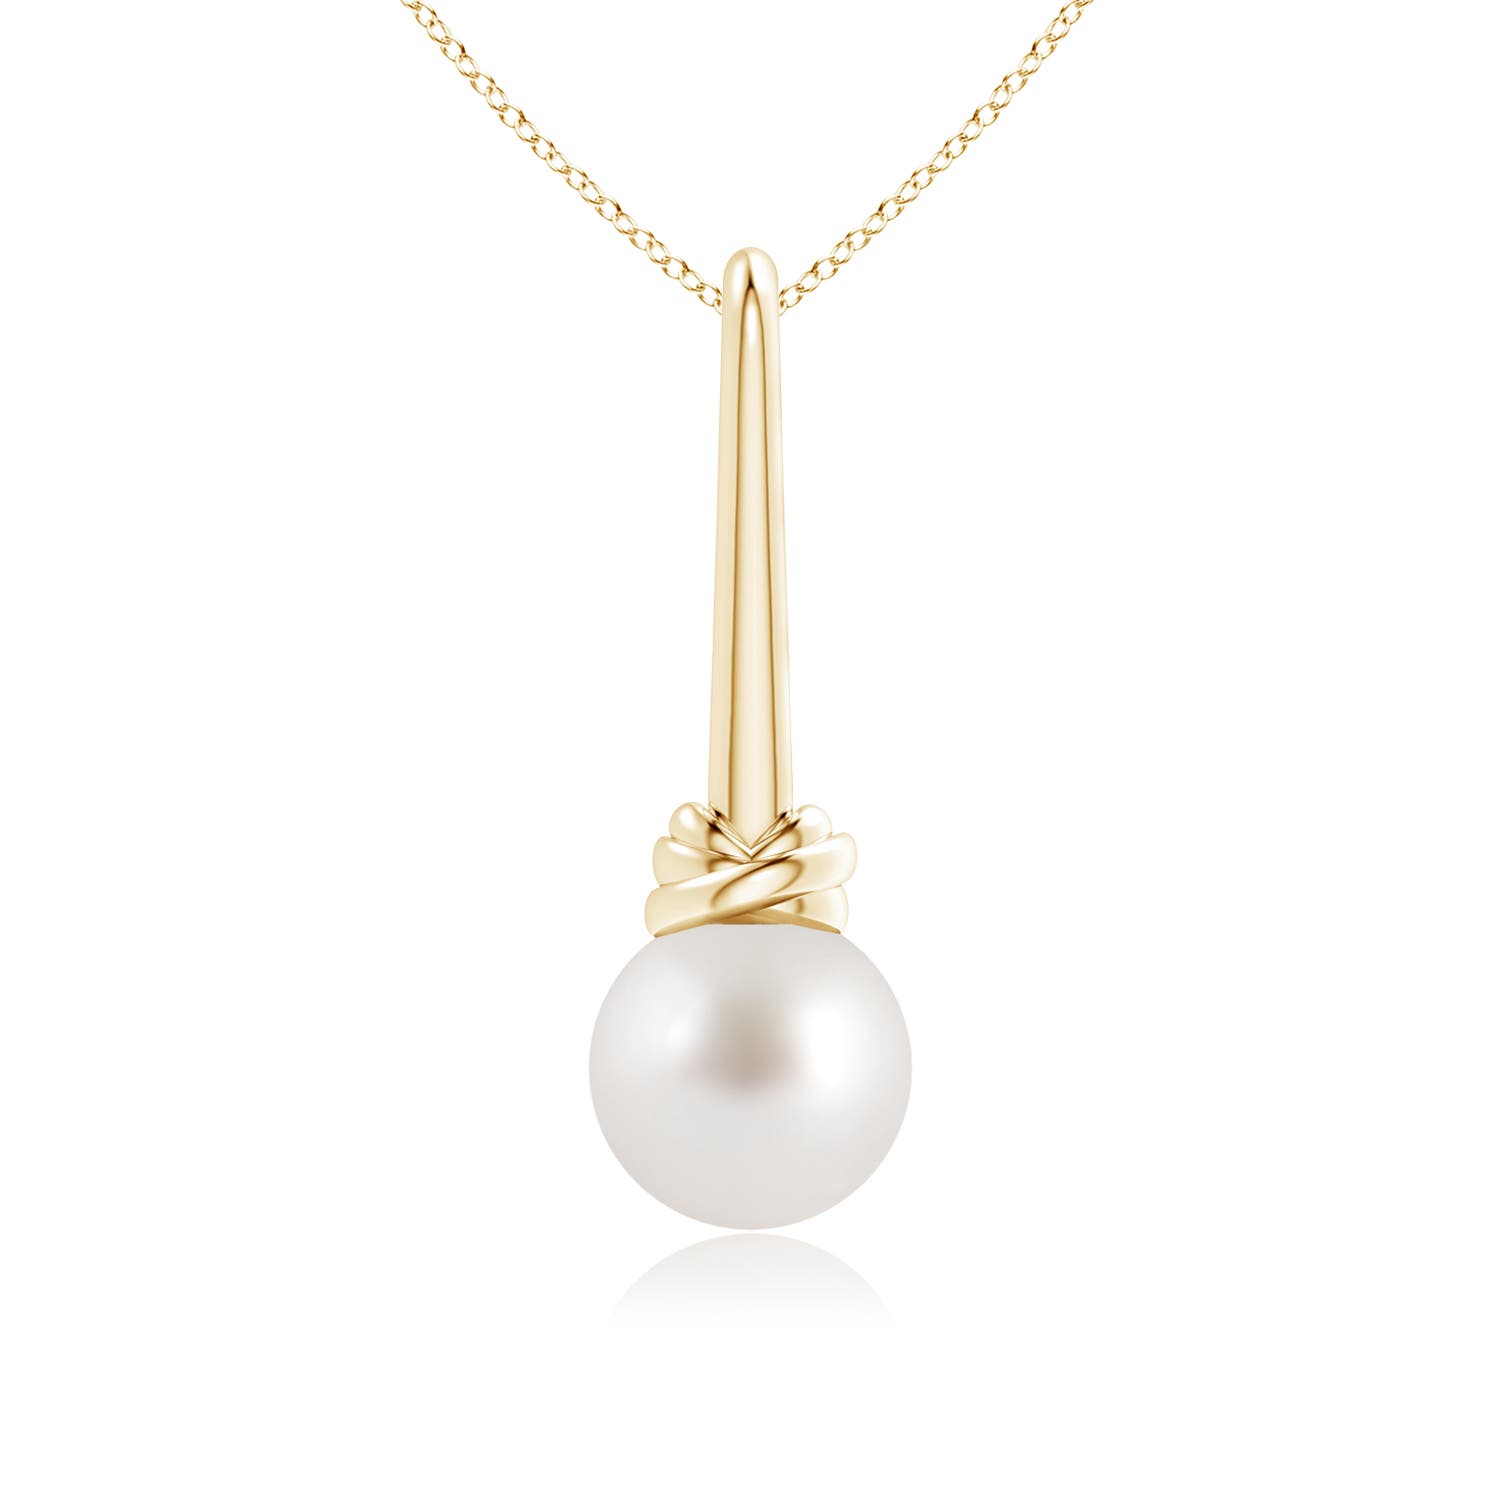 AAA - South Sea Cultured Pearl / 5.25 CT / 14 KT Yellow Gold